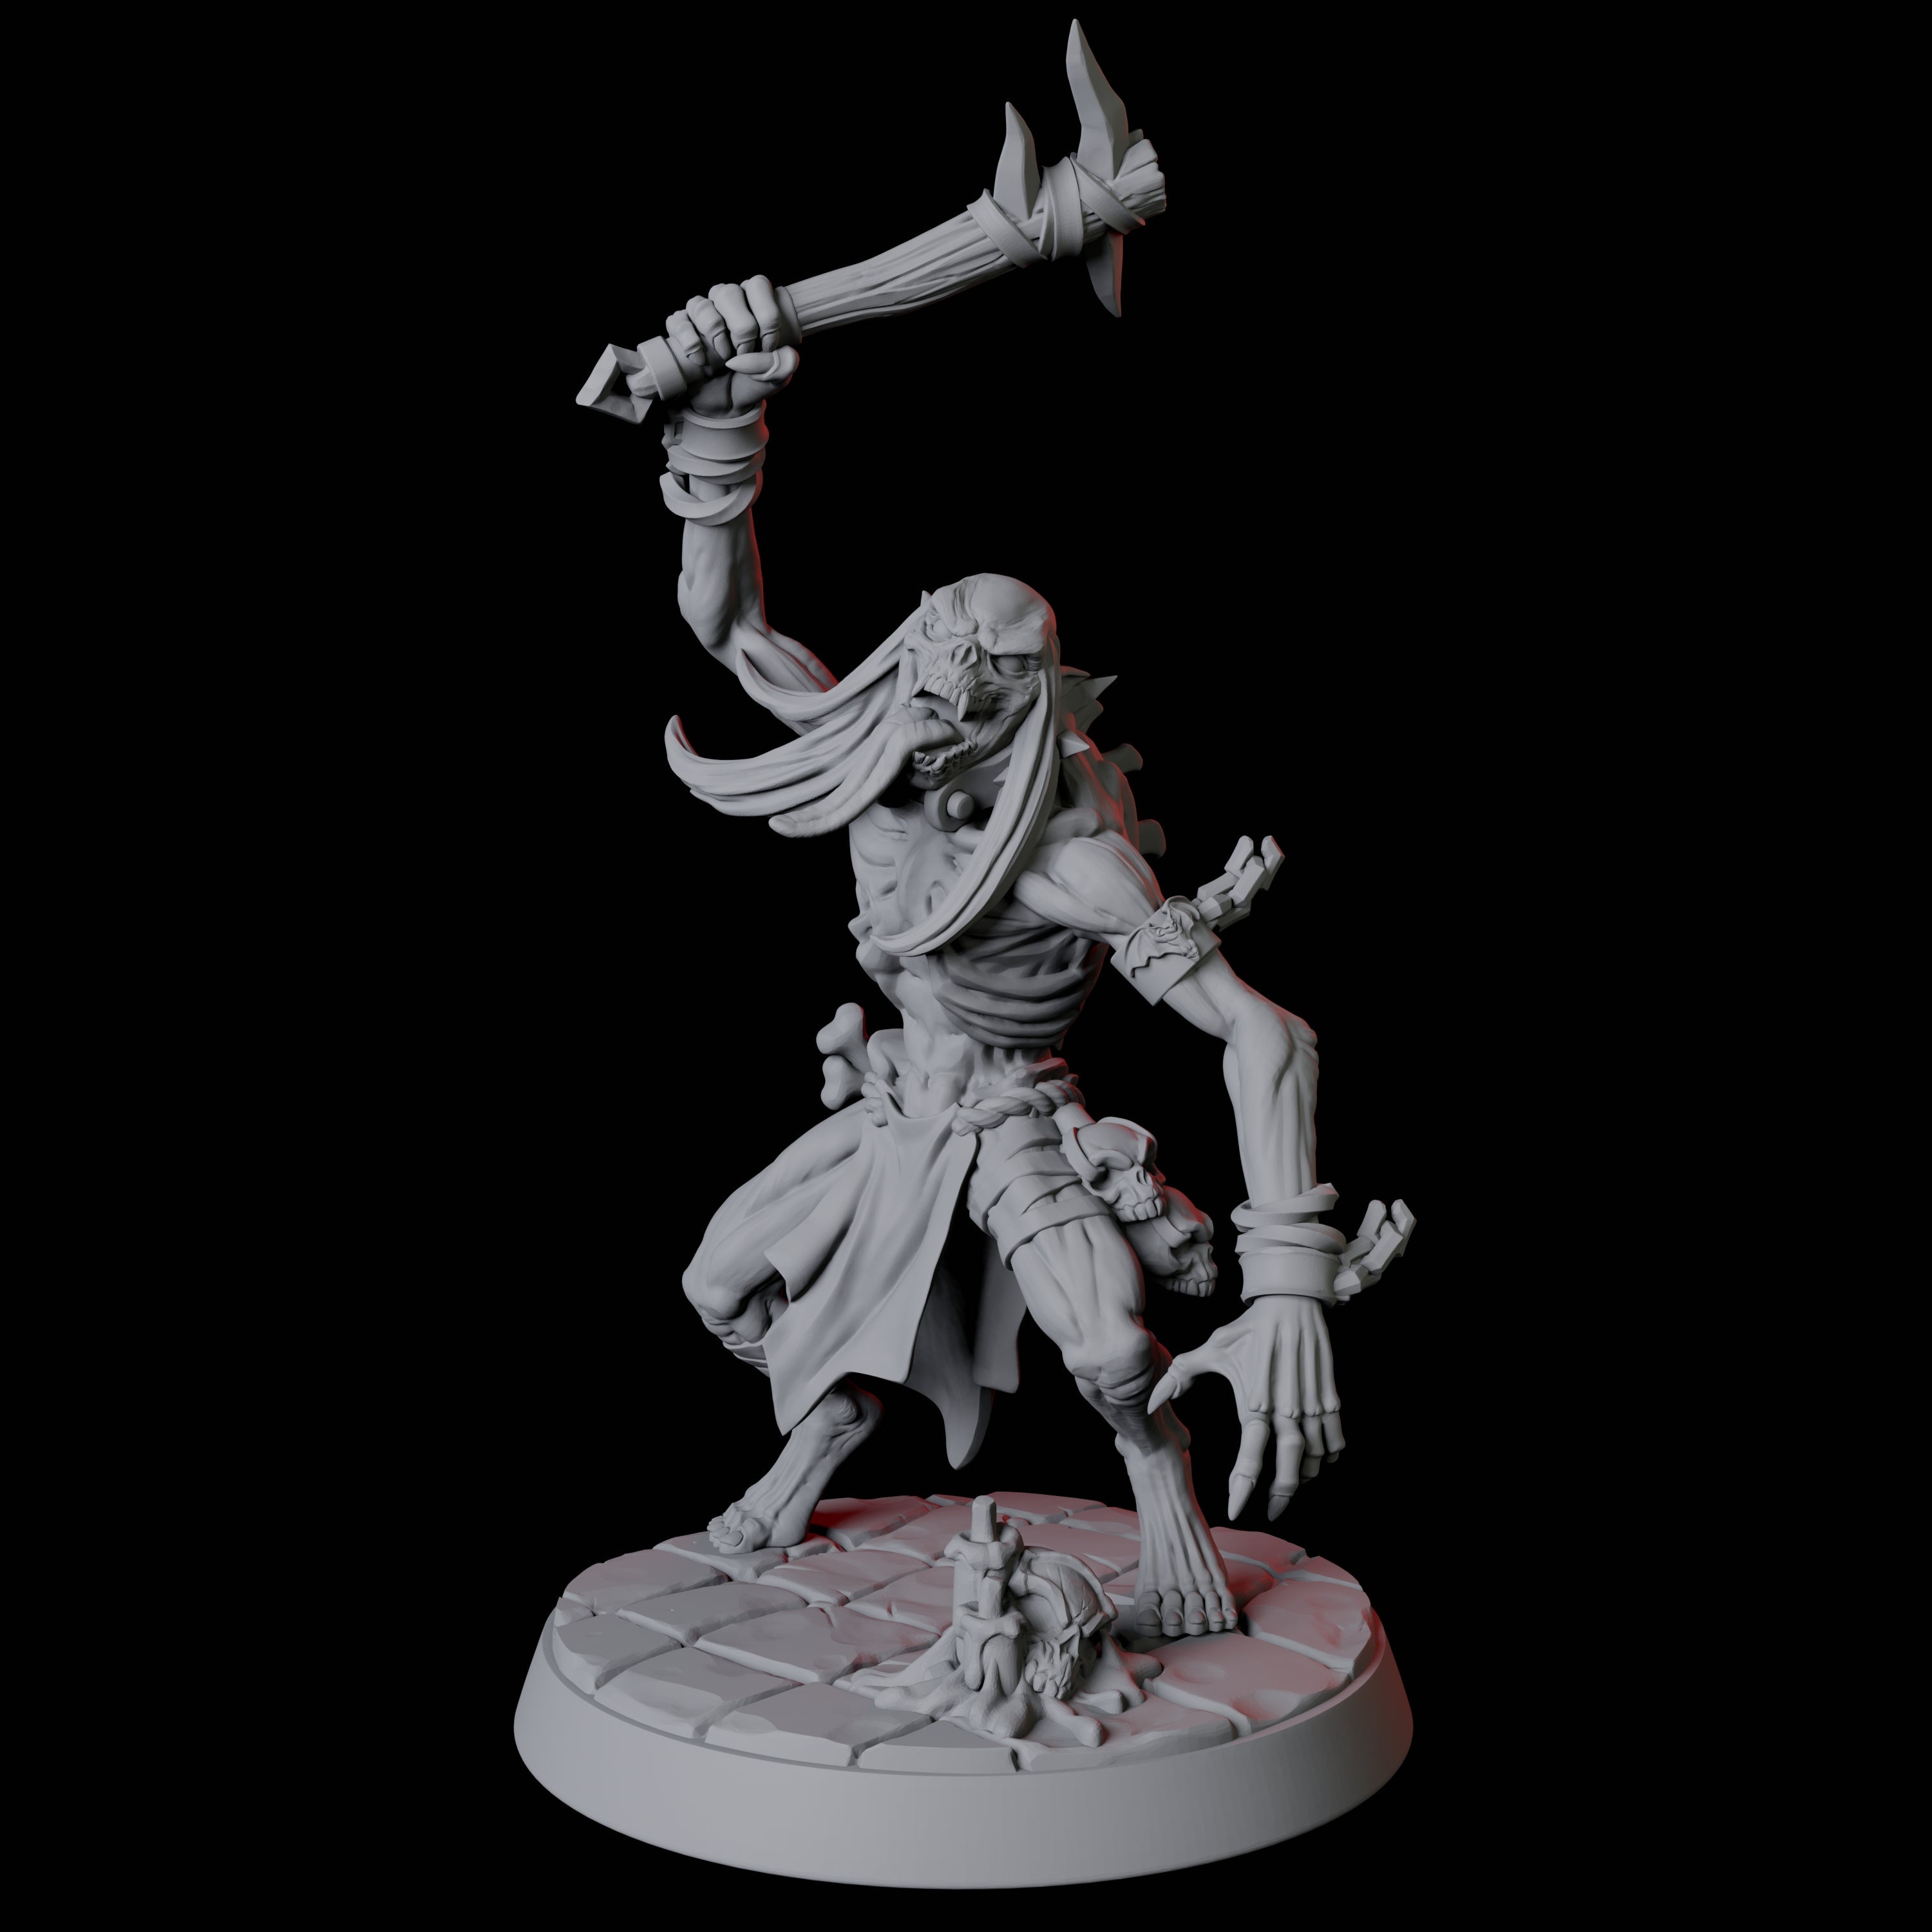 Six Creeping Ghouls Miniature for Dungeons and Dragons, Pathfinder or other TTRPGs